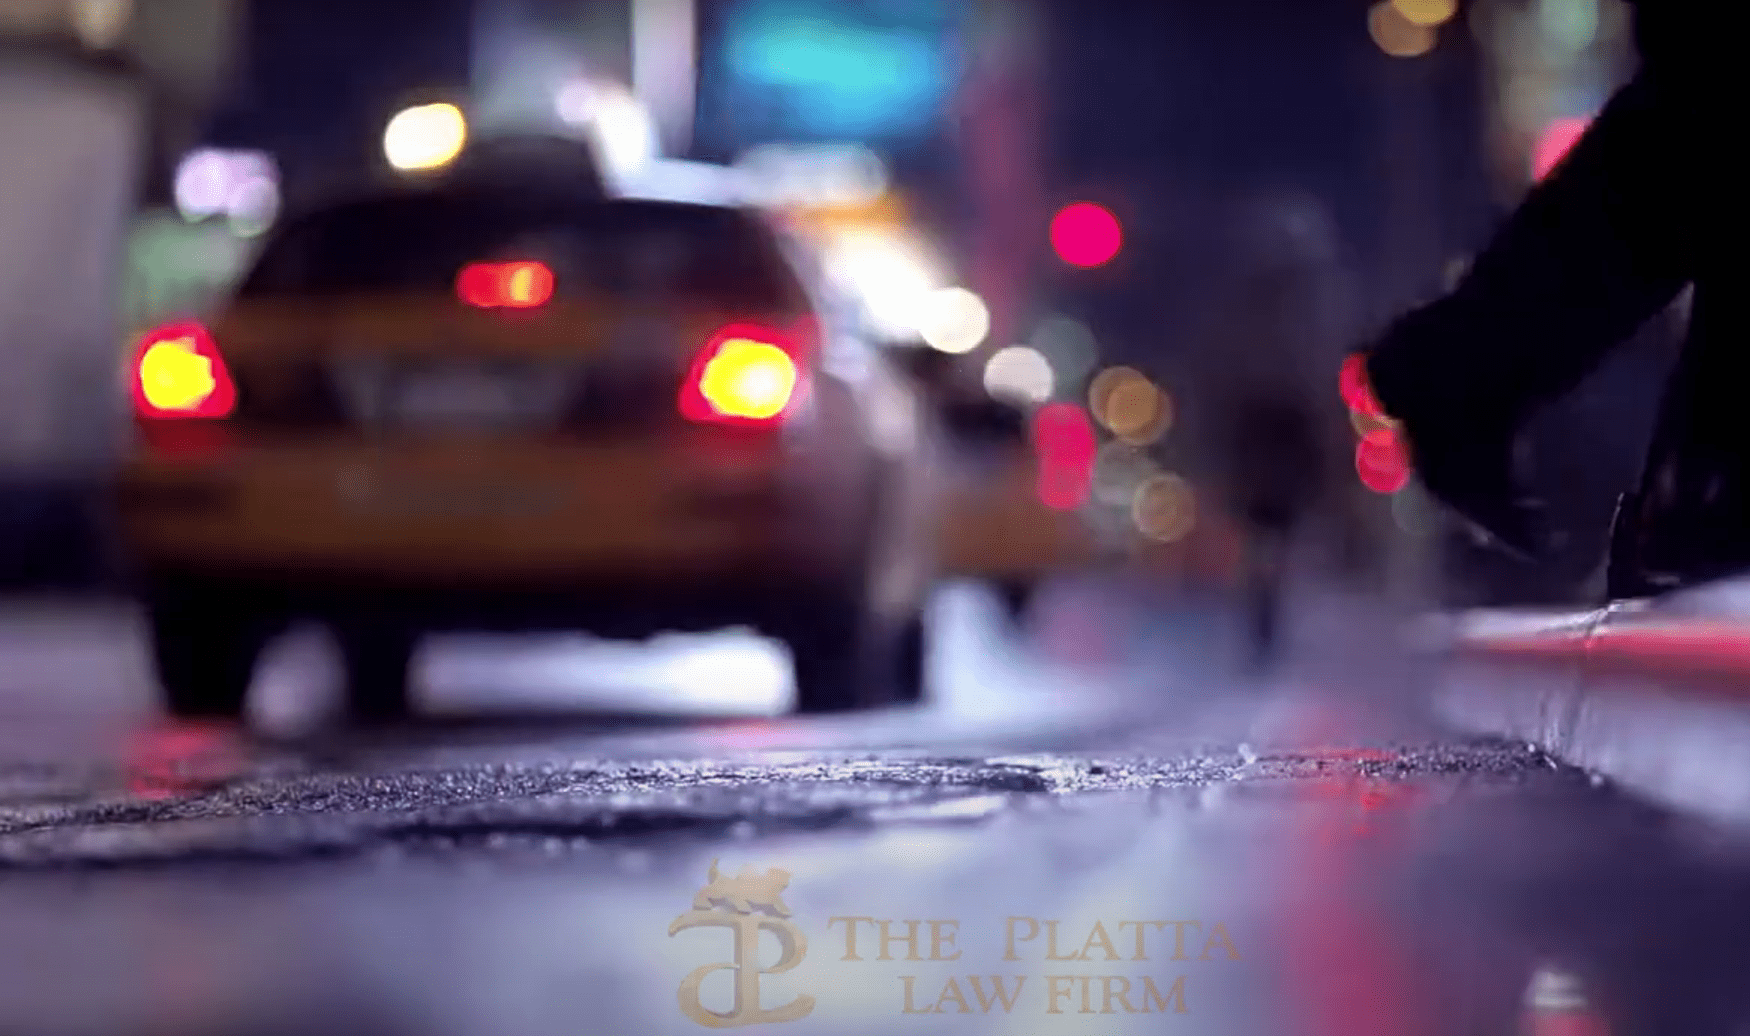 TAXI ACCIDENT LAWYER Post - The Platta Law Firm